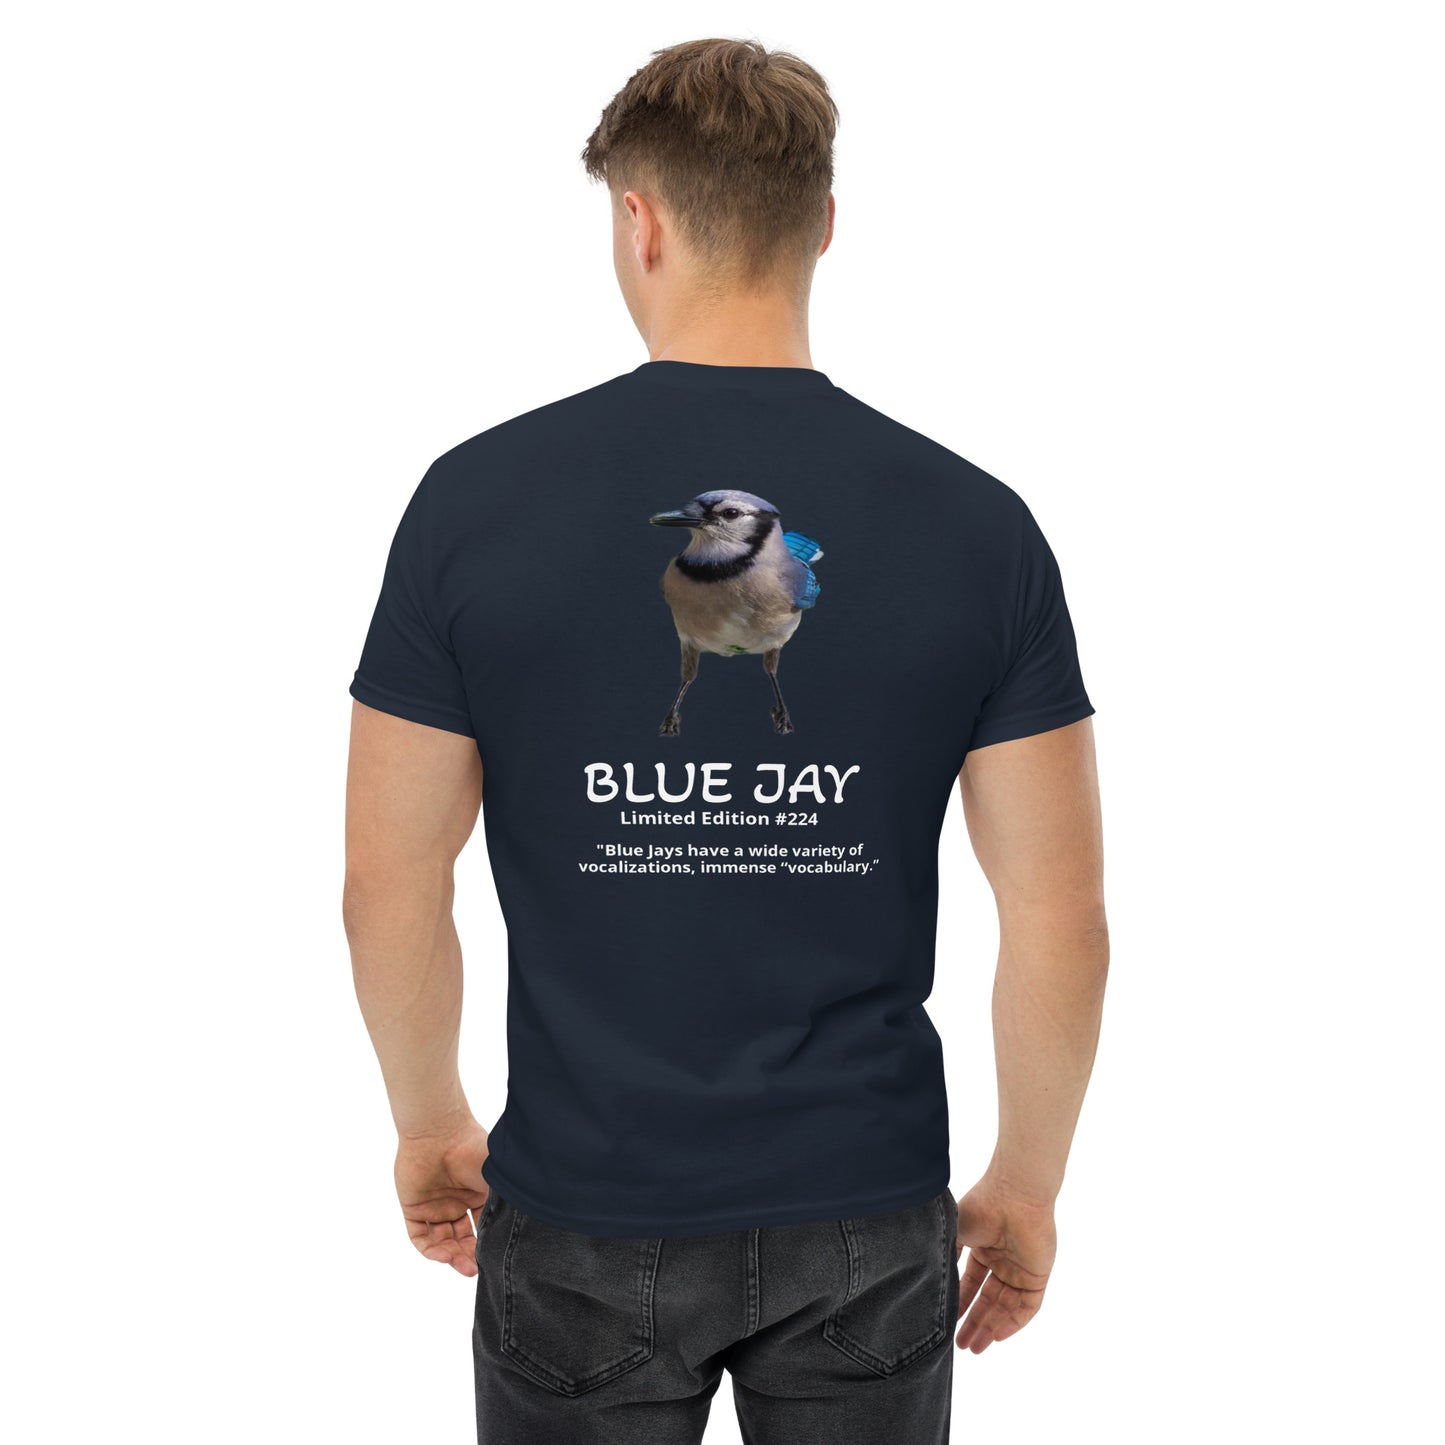 Blue Jay - Limited Edition